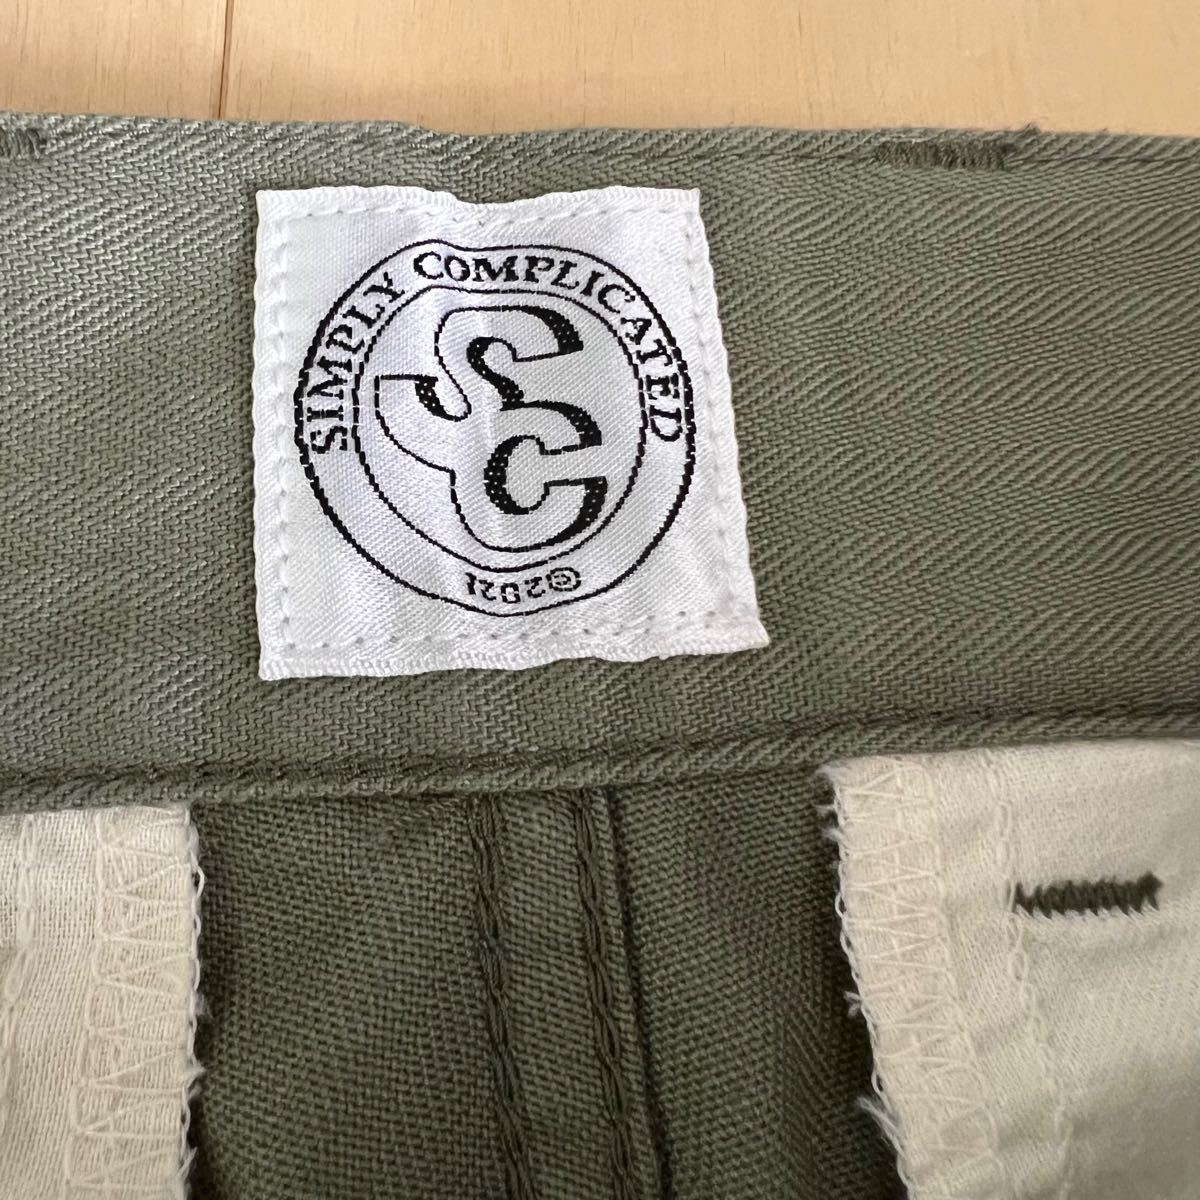 Simply Complicated BAKER CARGO PANTS OLIVE Mサイズ｜PayPayフリマ